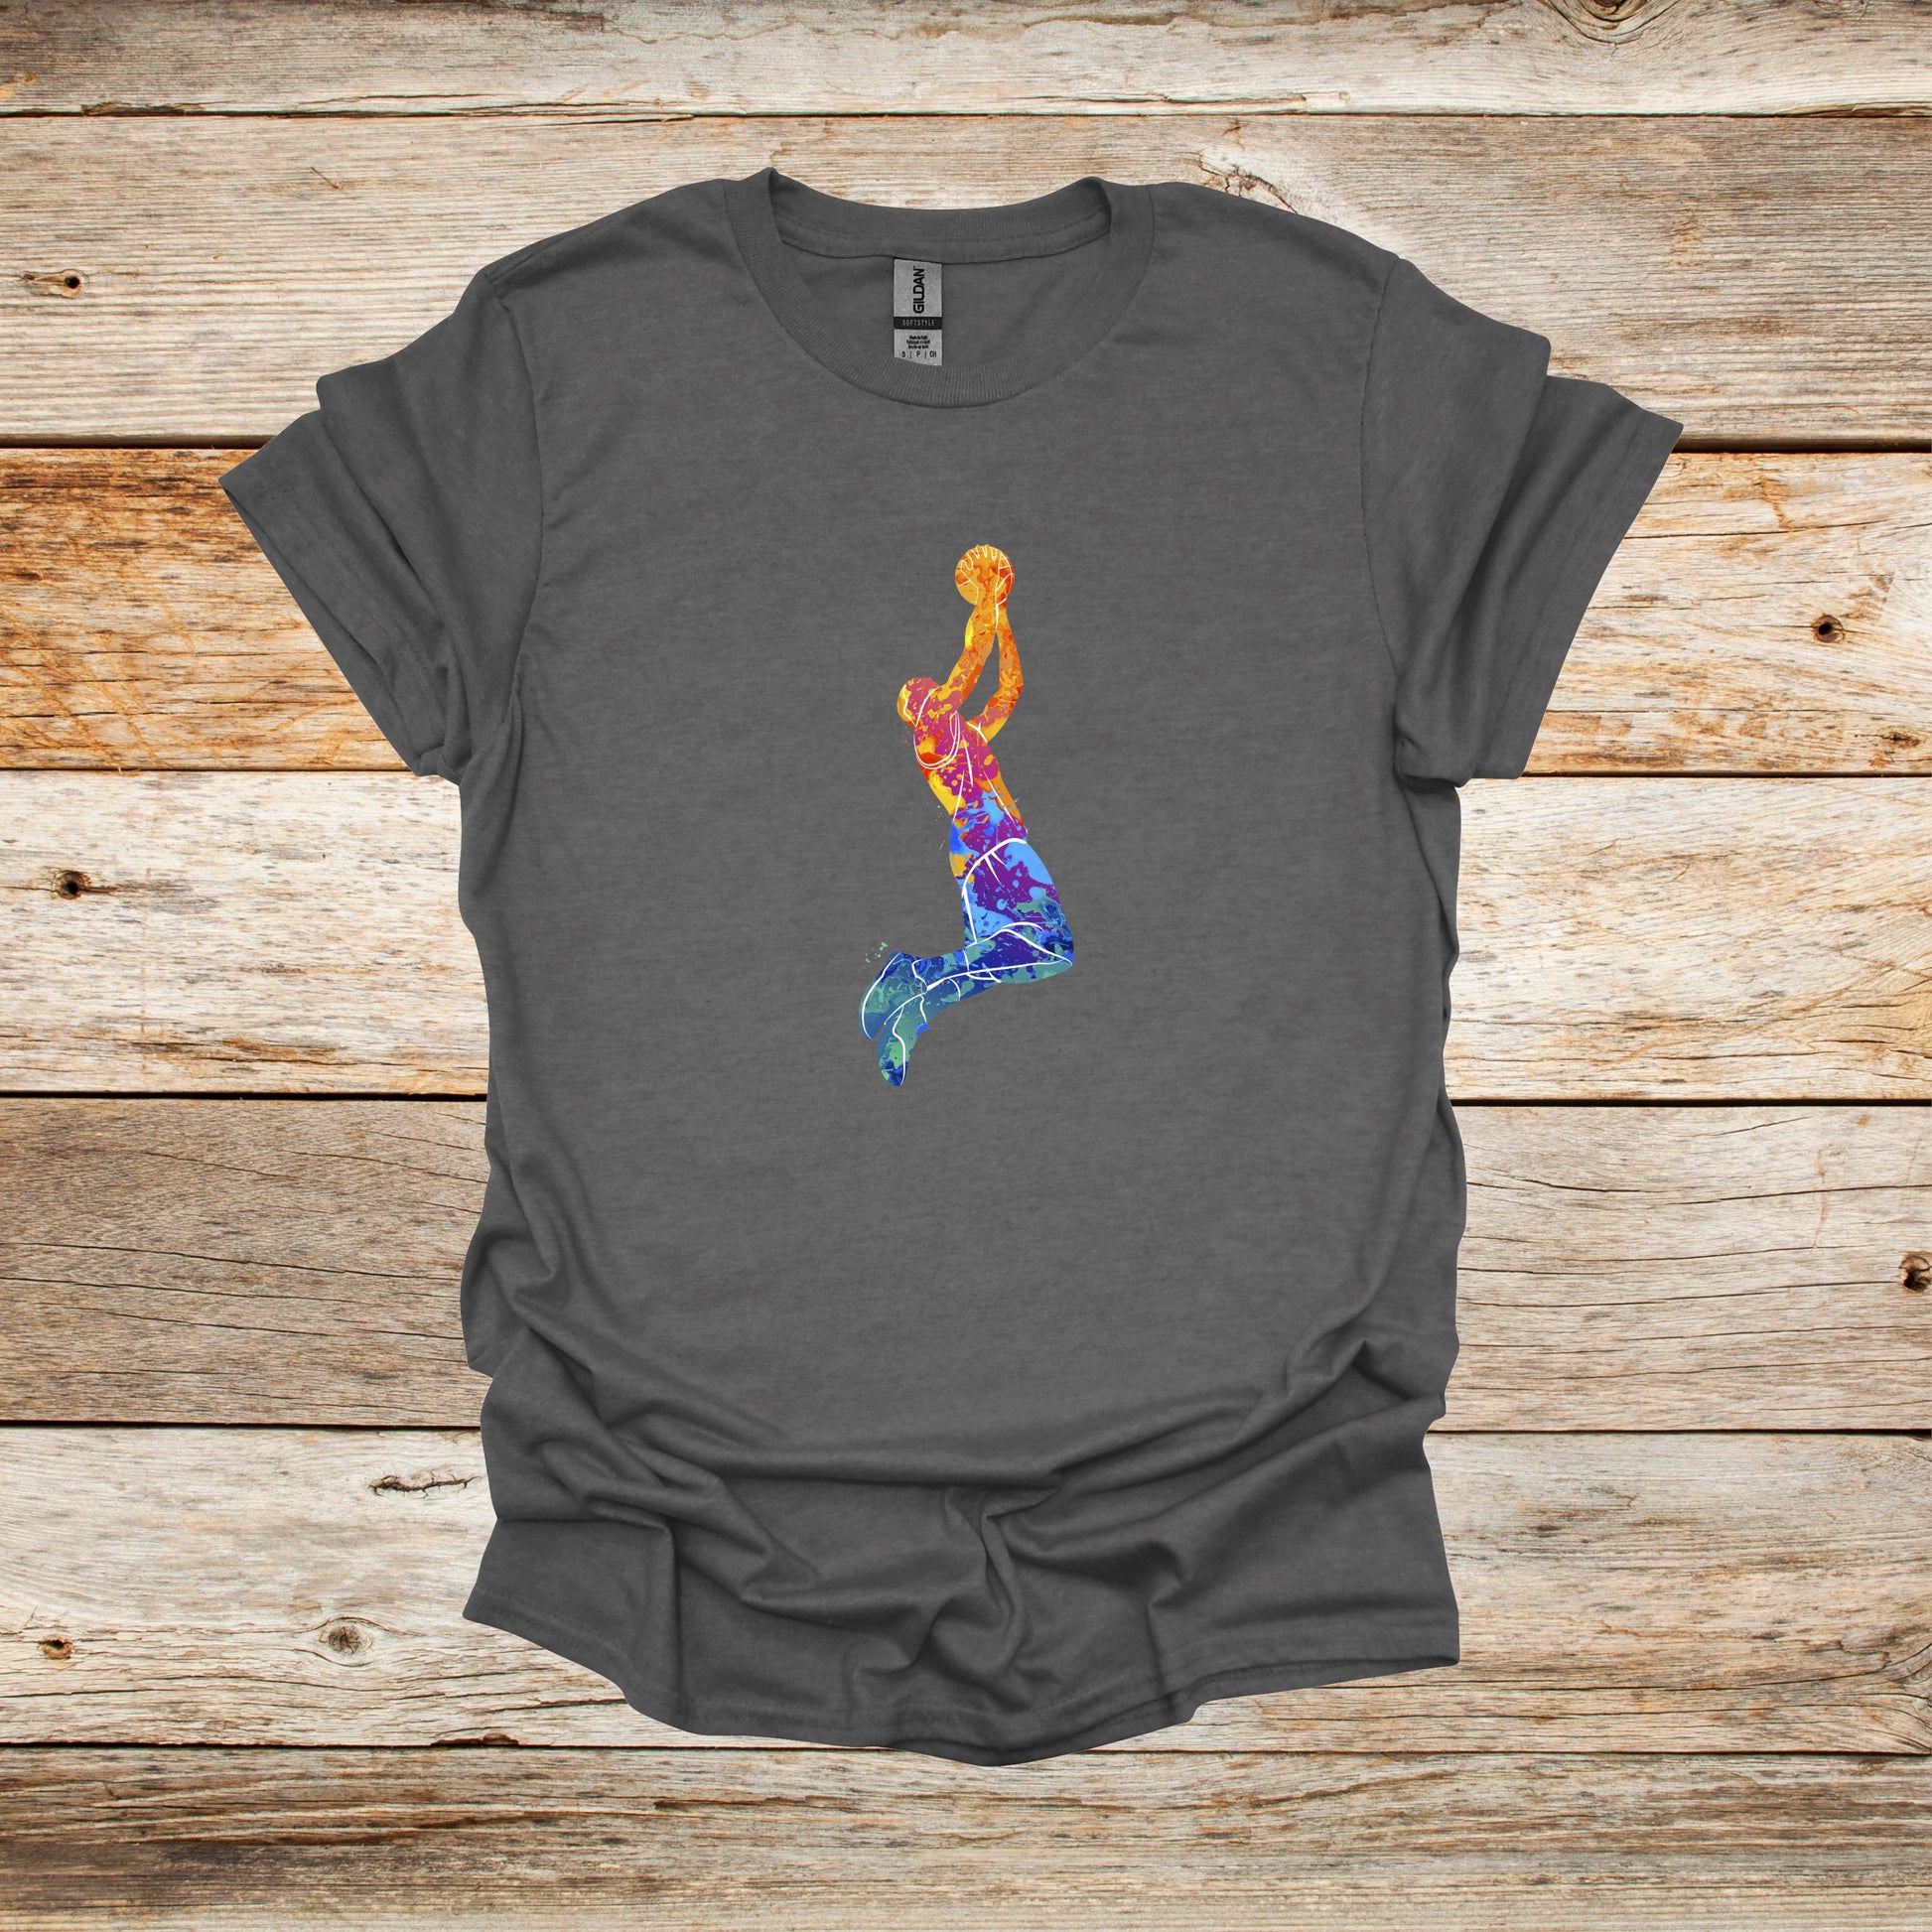 Basketball T-Shirt - Jump Shot - Adult and Children's Tee Shirts - Sports T-Shirts Graphic Avenue Graphite Heather Adult Small 